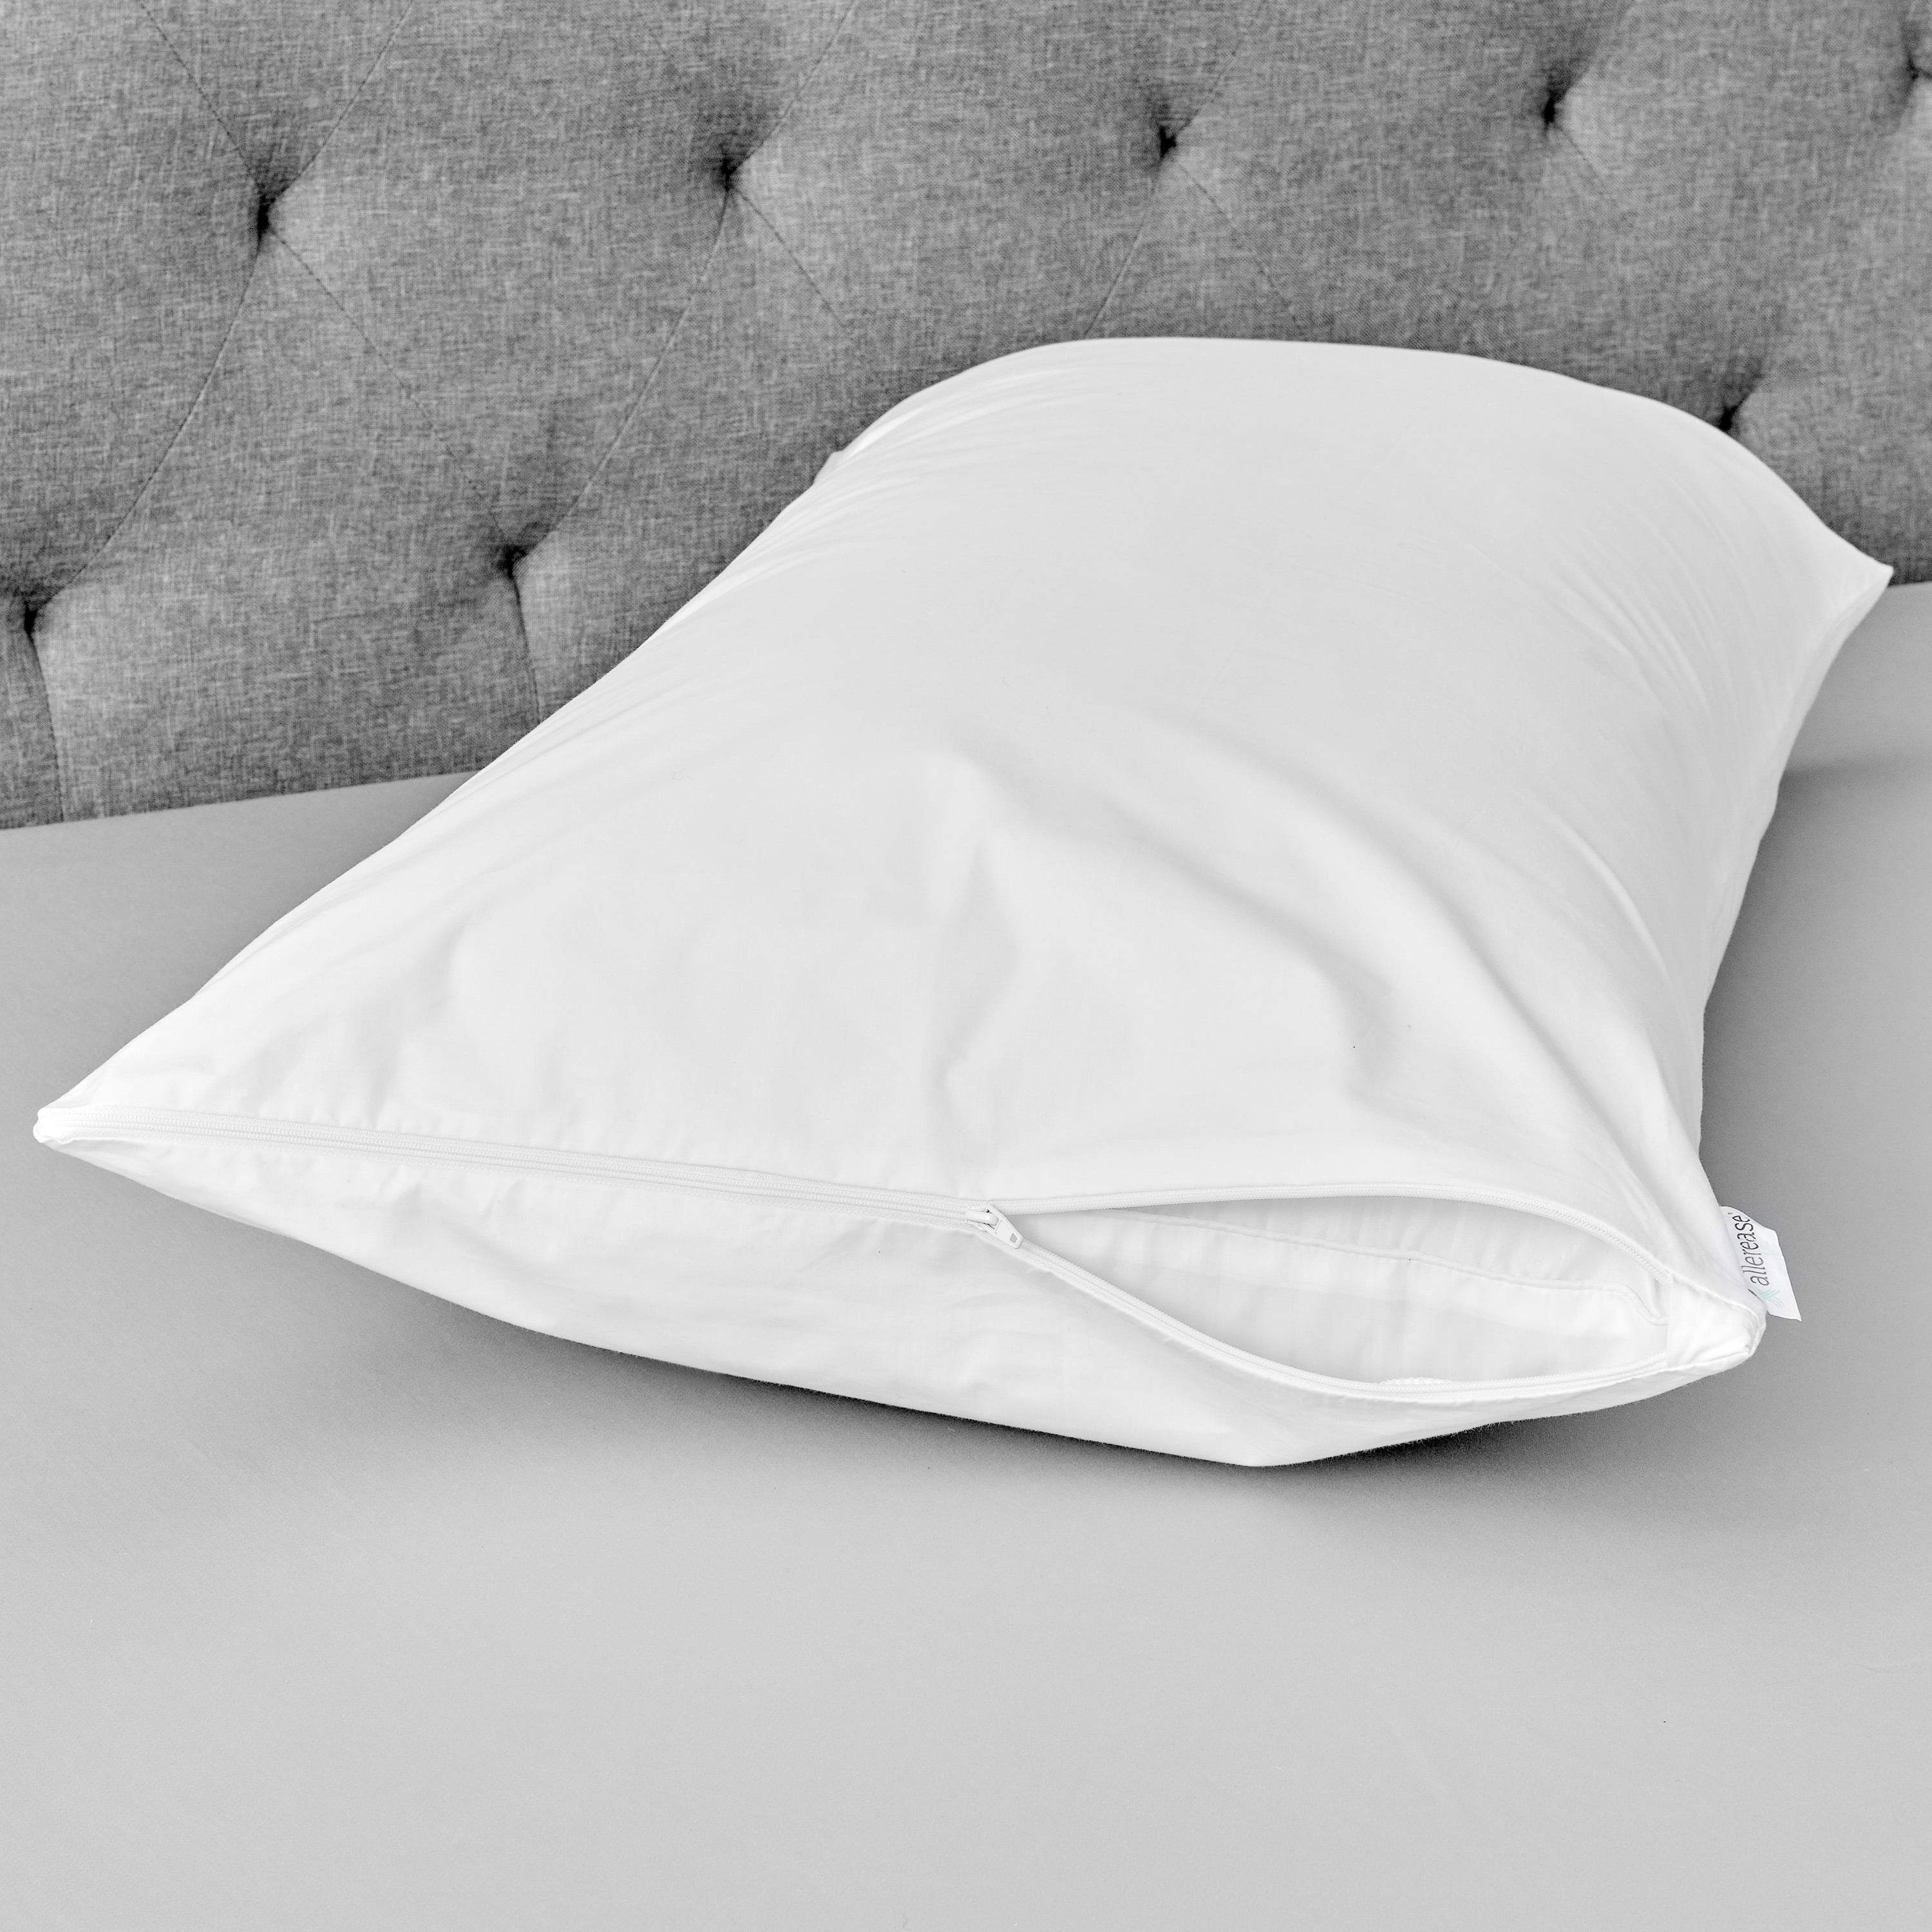 Pillows cover,Bedroom,pillows protector,anti allergen pillows,waterproof 